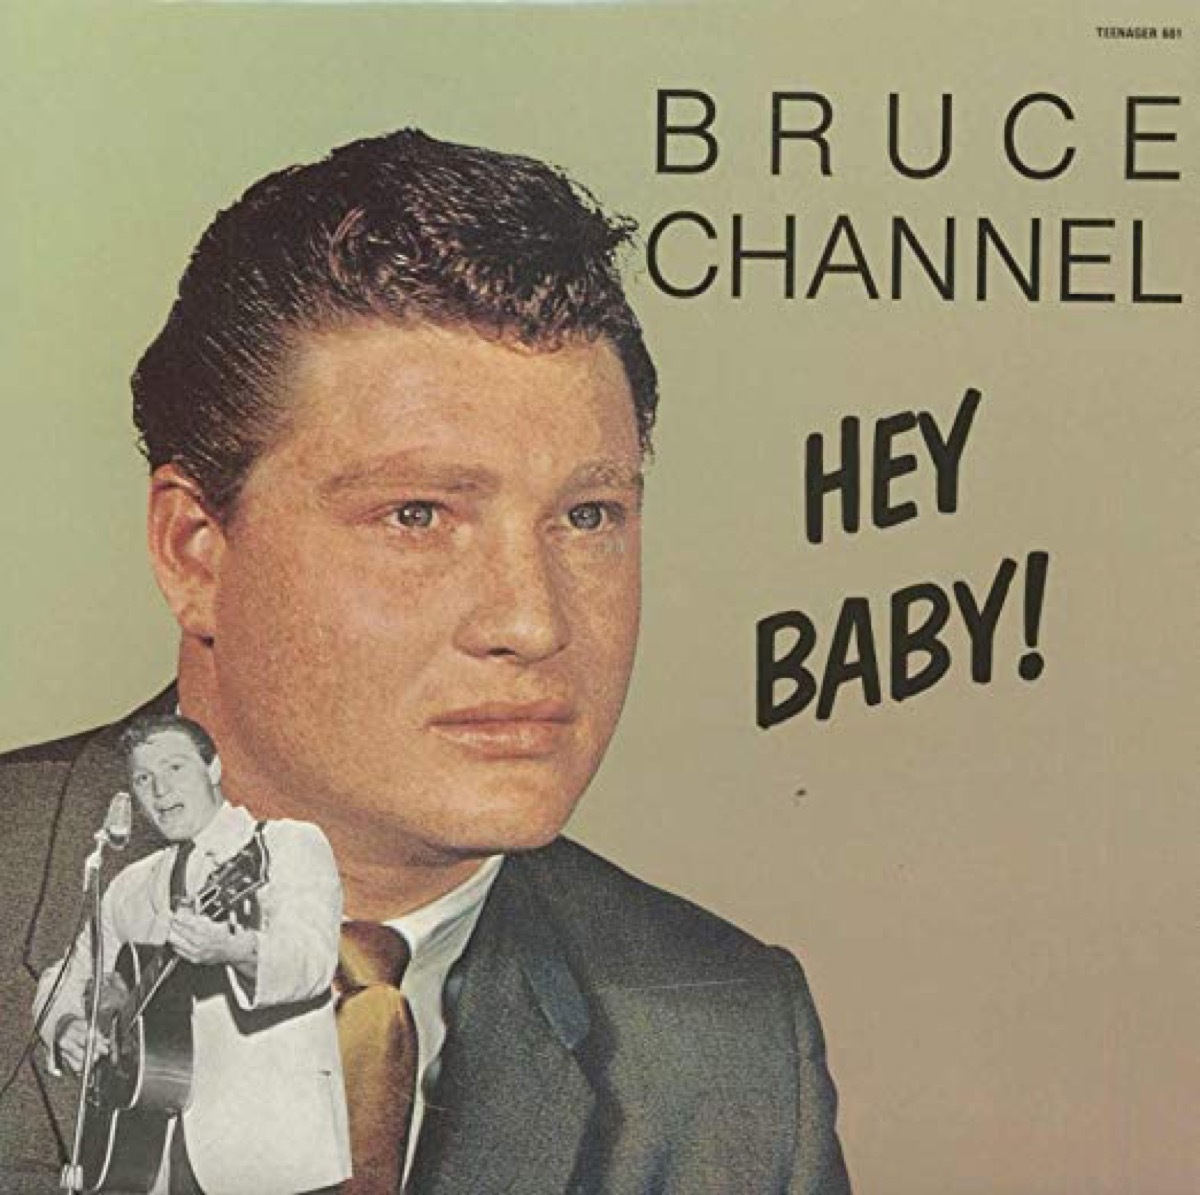 Bruce Channel's only hit 